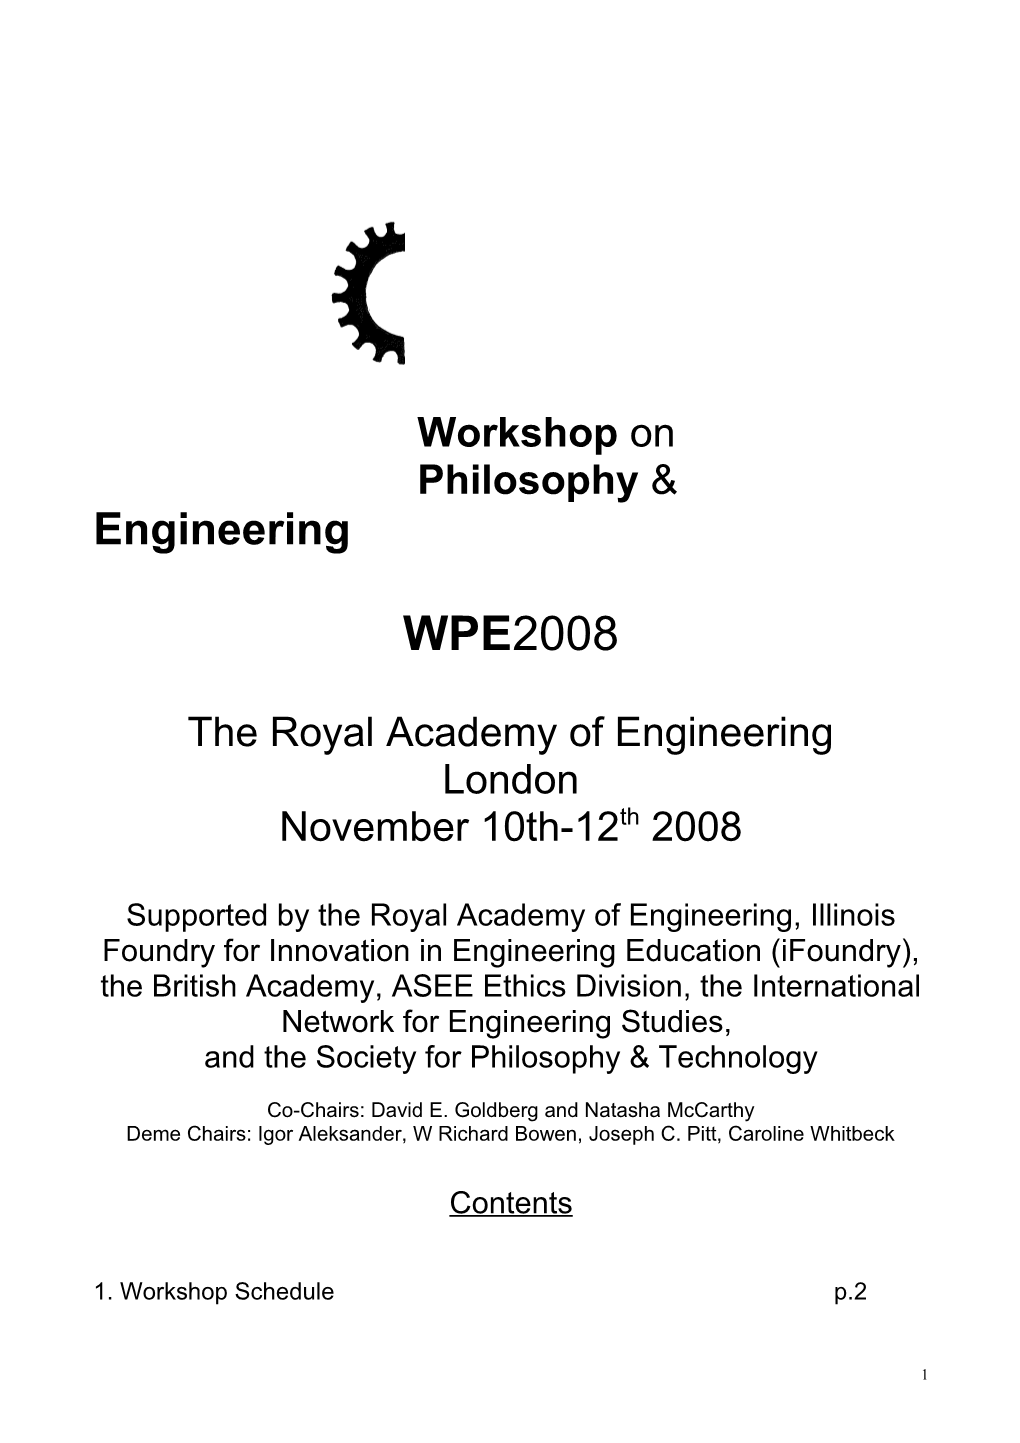 The Royal Academy of Engineering